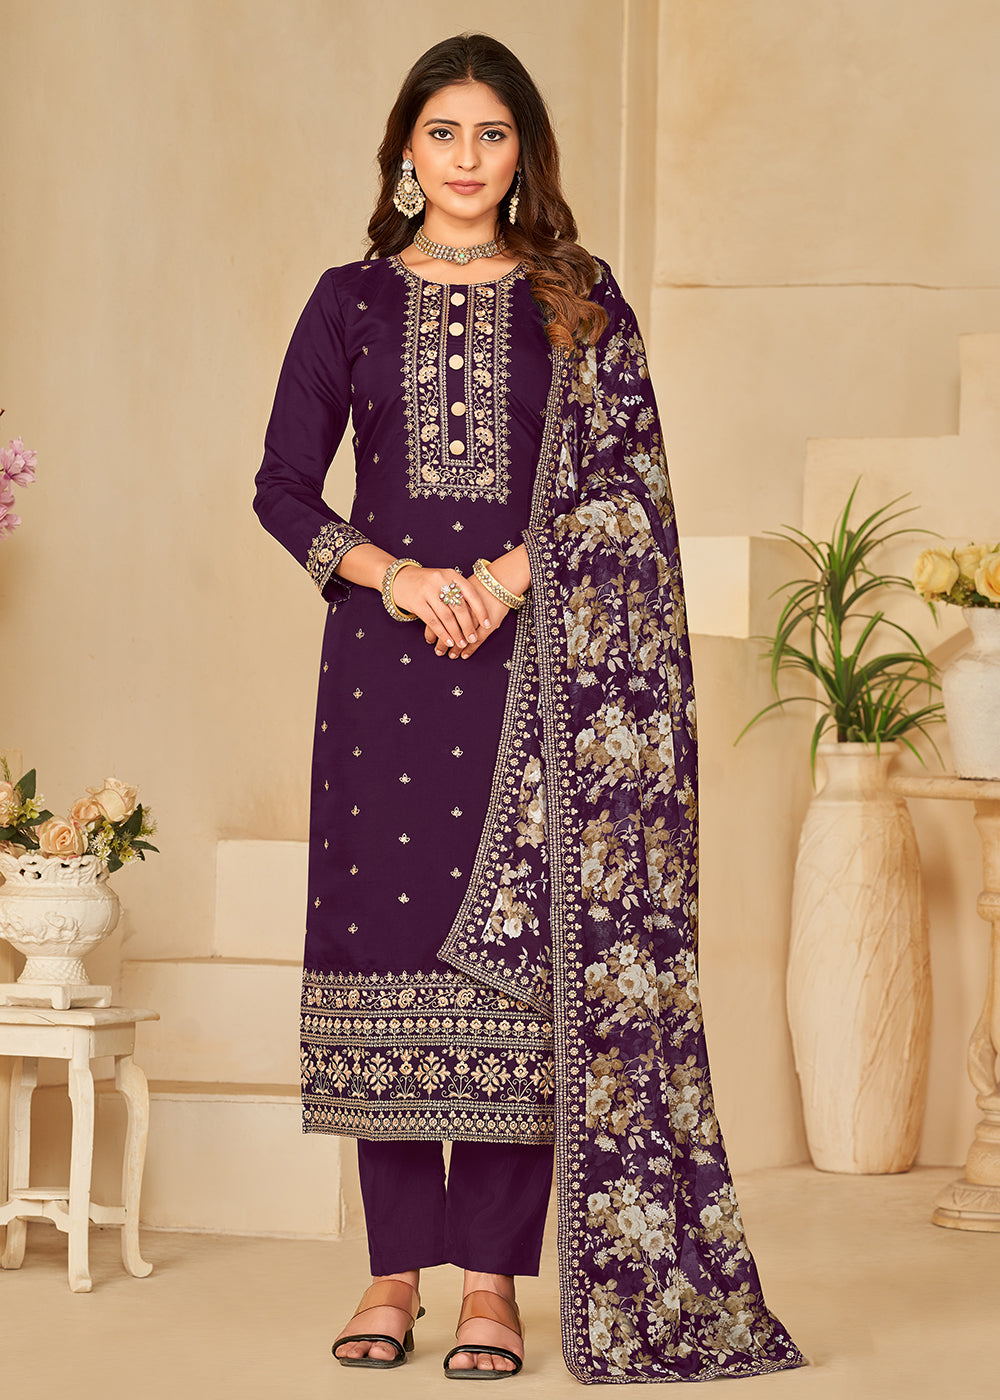 Buy Now Pant Style Purple Silk Embroidered Ethnic Salwar Kameez Online in USA, UK, Canada, Germany, Australia & Worldwide at Empress Clothing. 